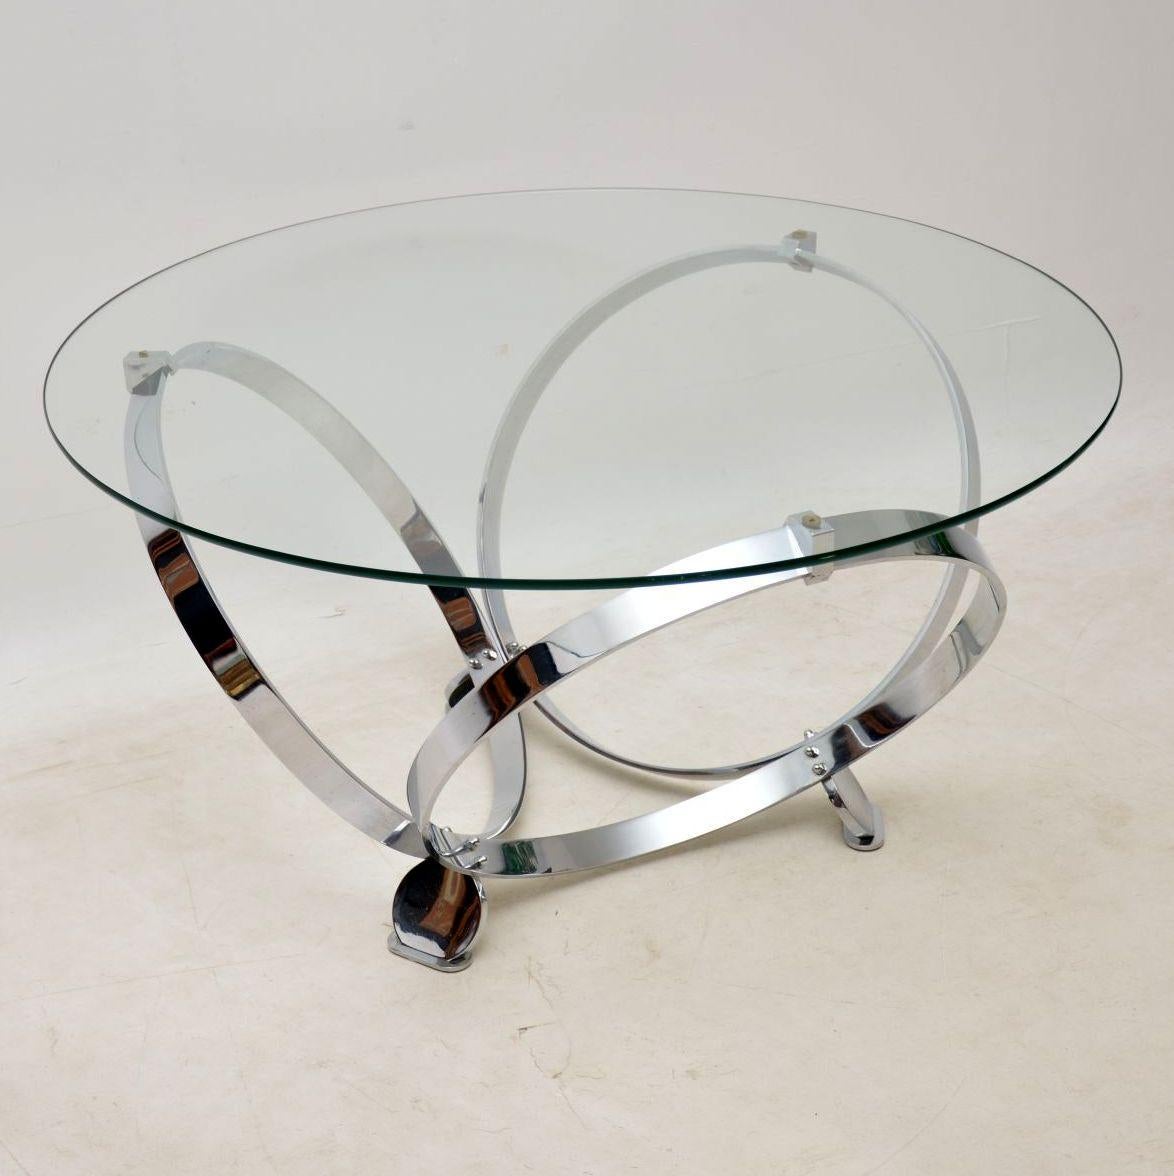 An exceptionally stylish and extremely well made coffee table in chromed steel and glass, this was designed by Knut Hesterberg, it was made in Germany in the 1970s. It has a striking design with three large chrome rings, linked at the base by three